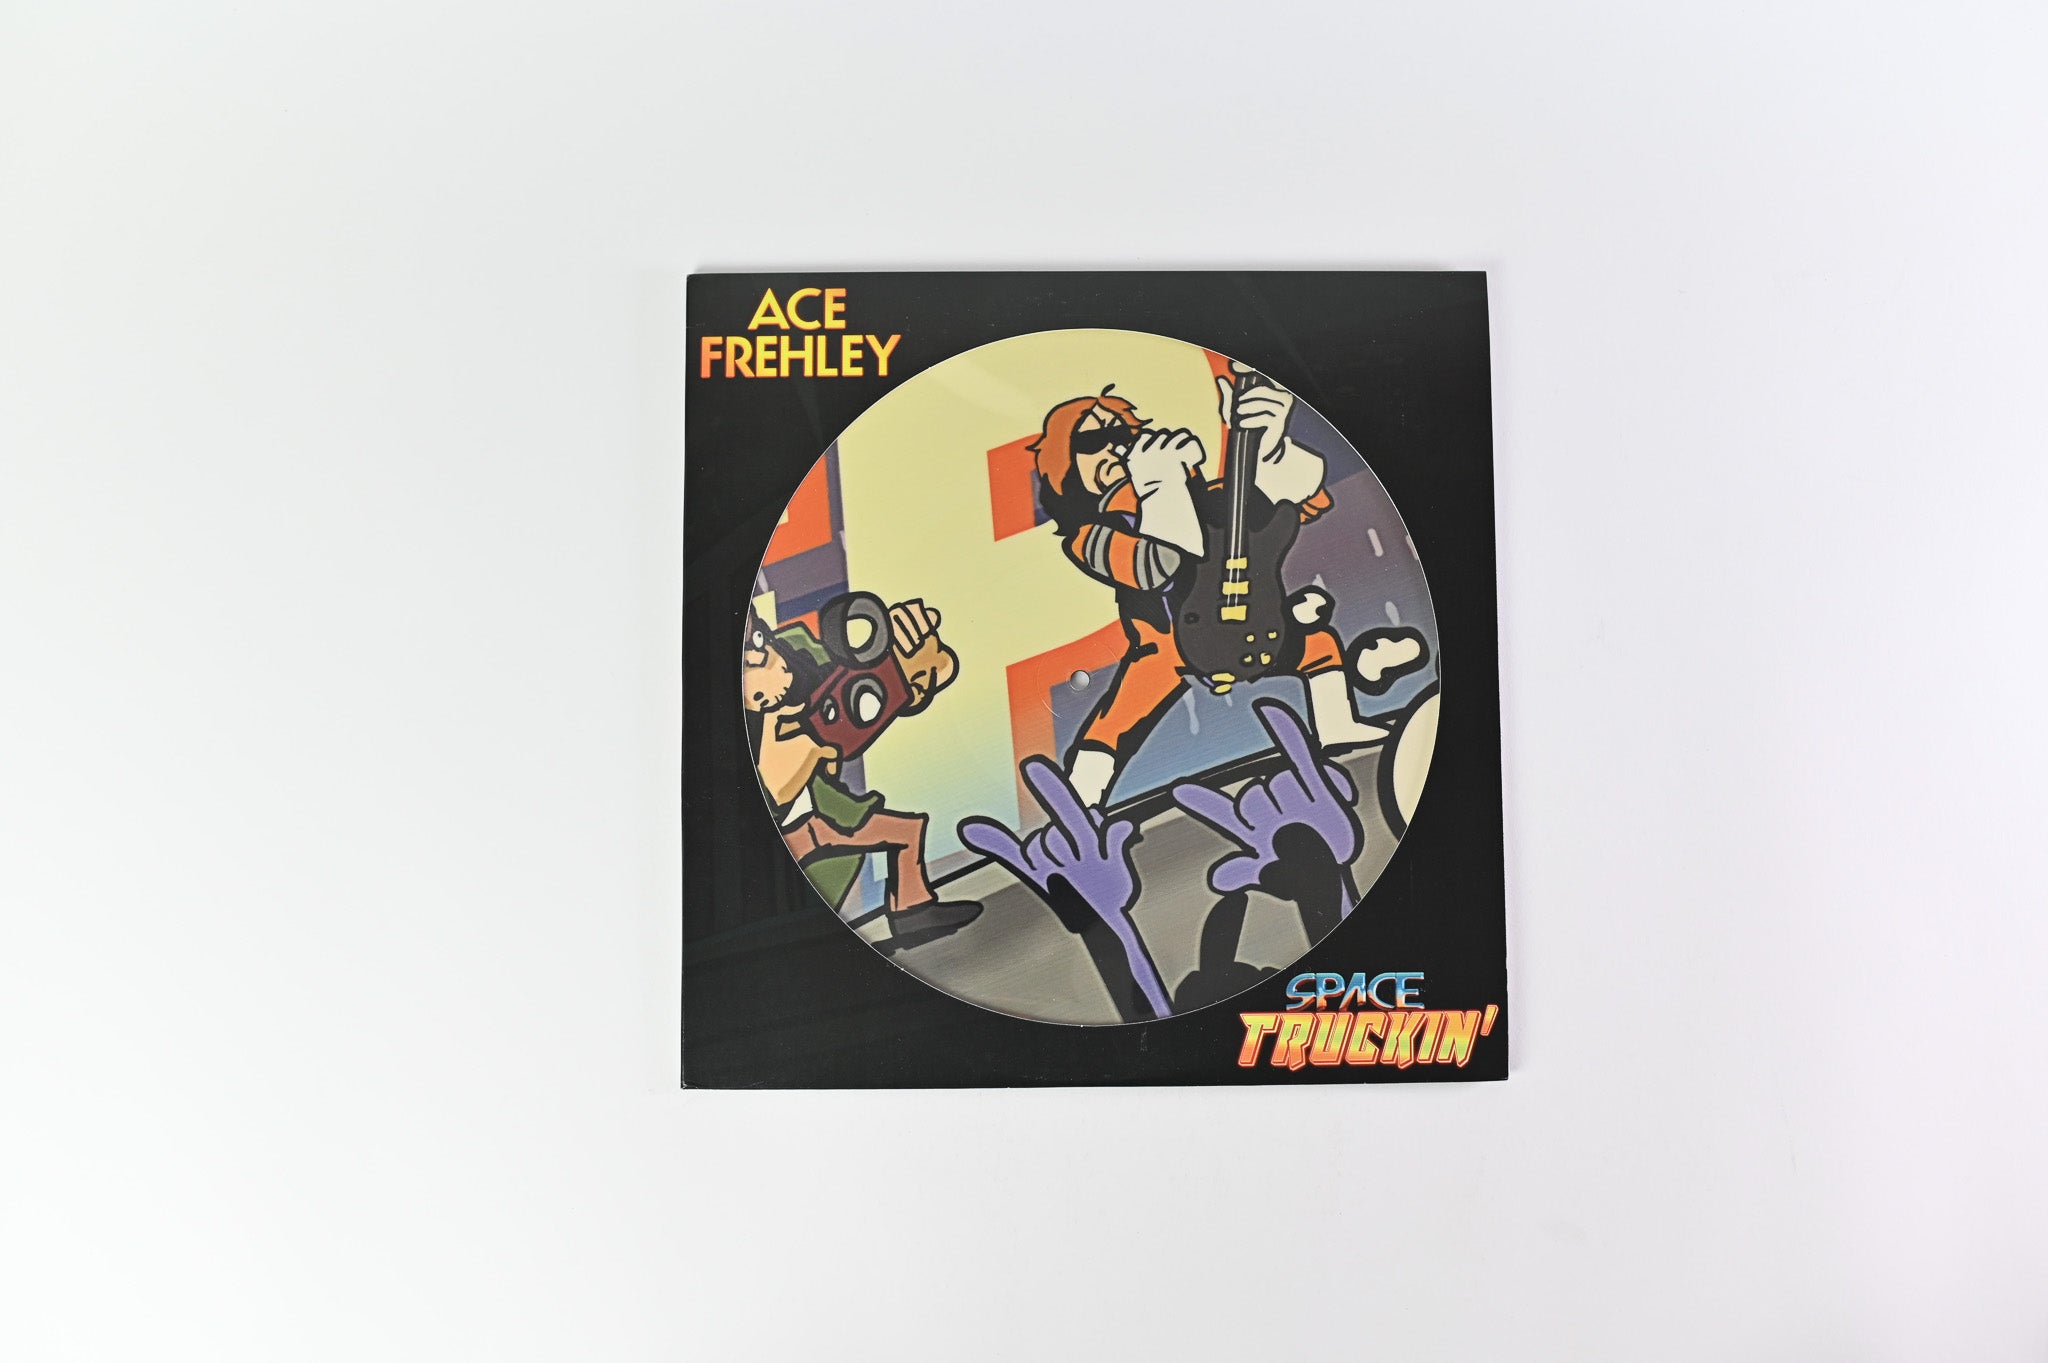 Ace Frehley - Space Truckin' on eOne Picture Disc